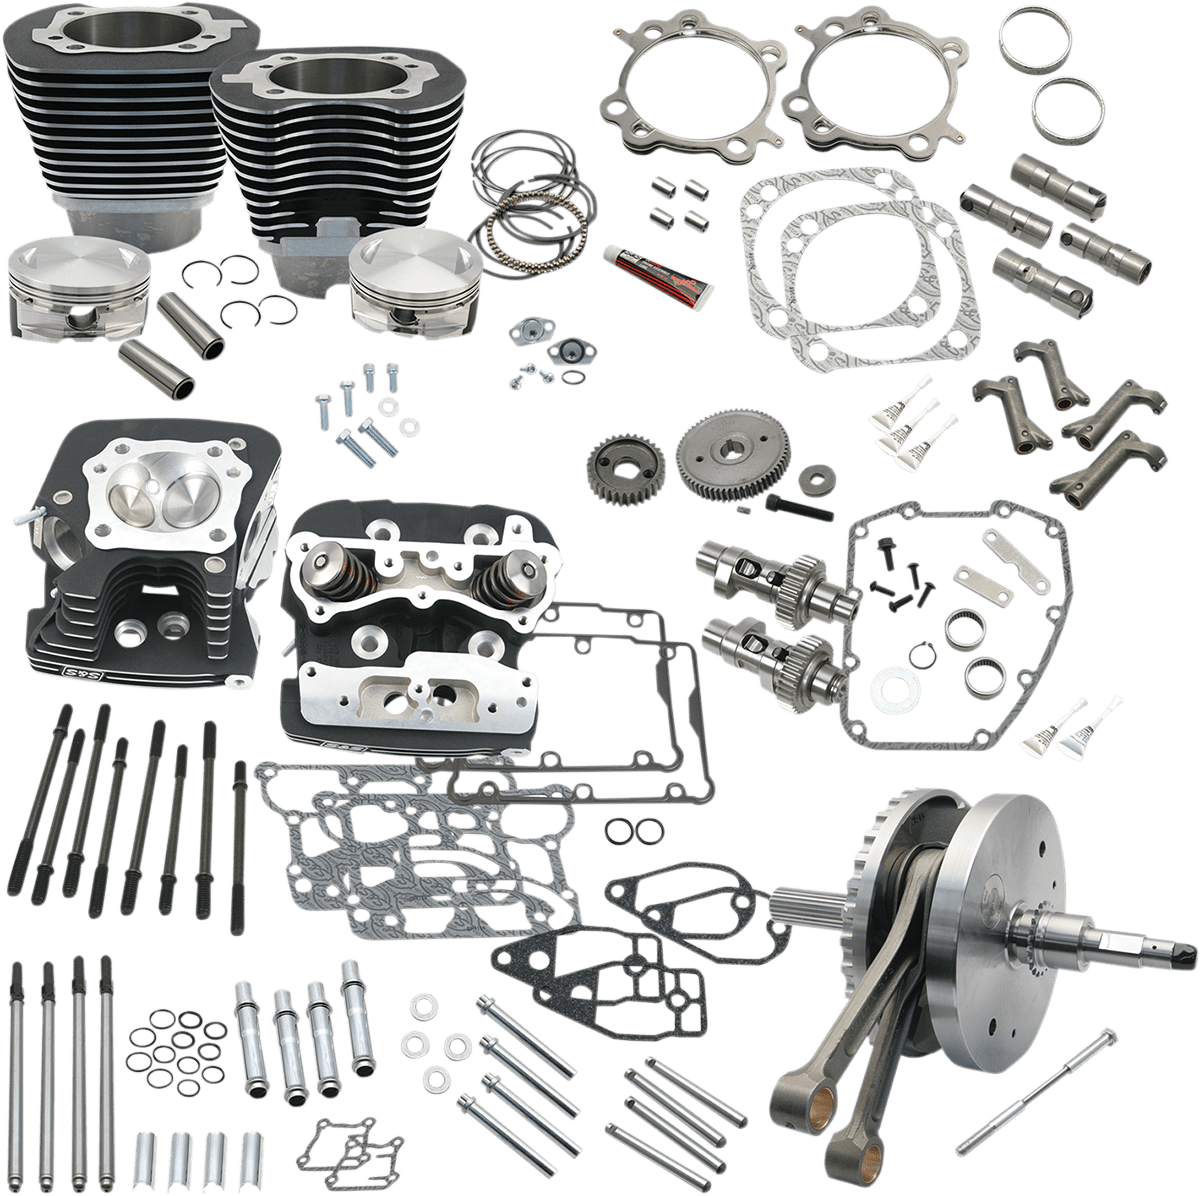 S&S CYCLES-124" Hot Set Up® Engine Performance Kits / '99-'17 Twin Cams-Big Bore Kit-MetalCore Harley Supply